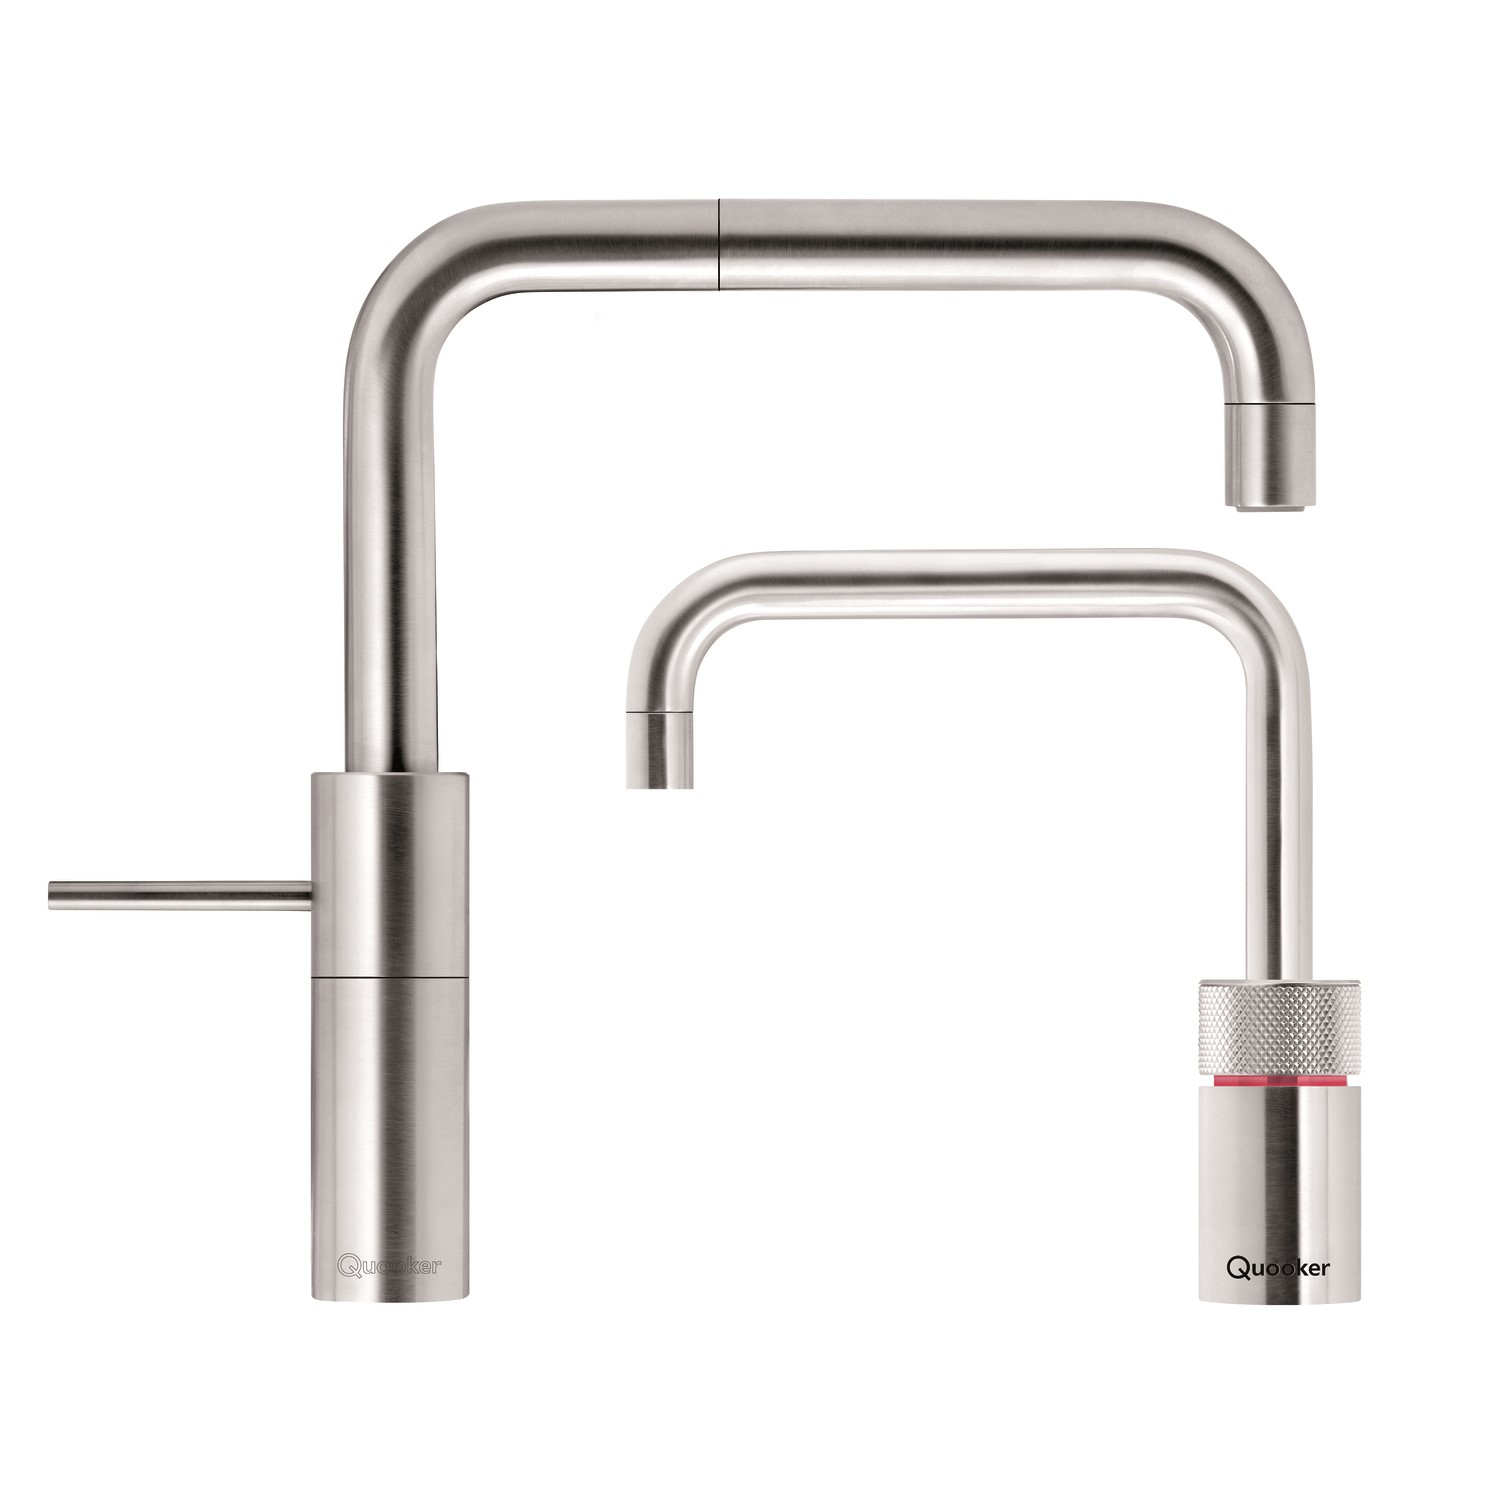 Quooker Nordic Square Stainless Steel Twin Taps